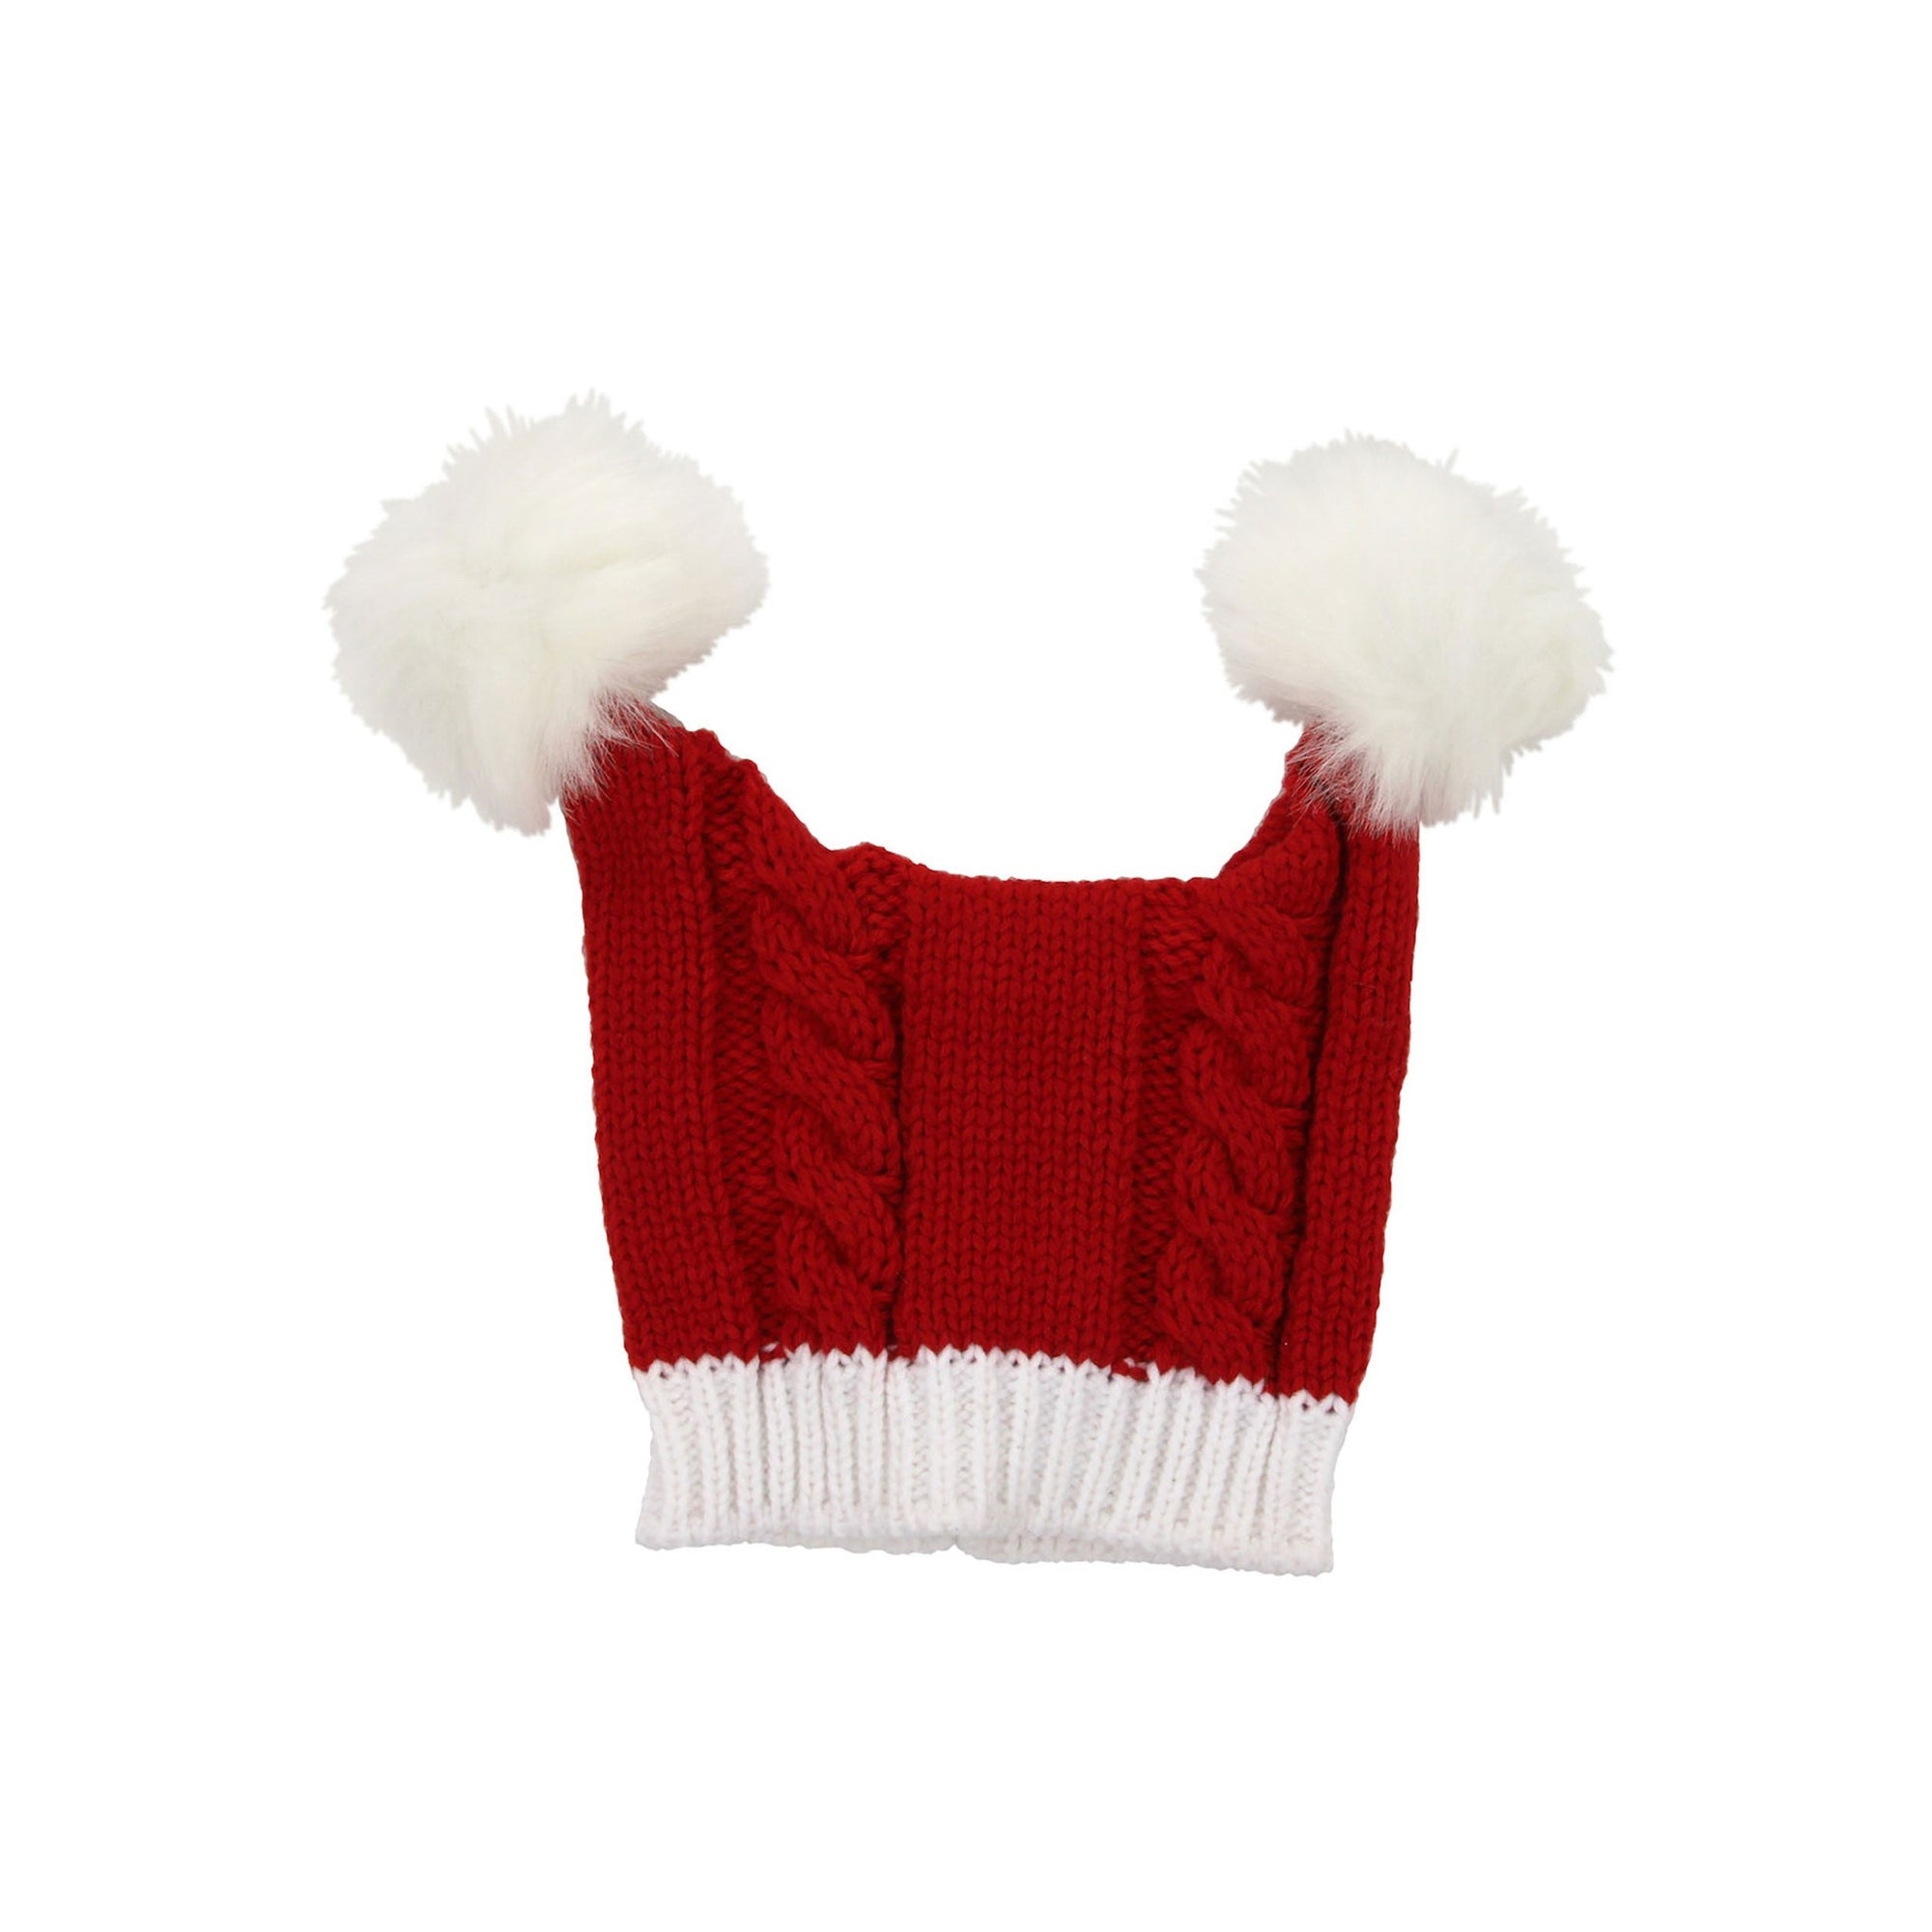 Front view of Santa Knit Hat.